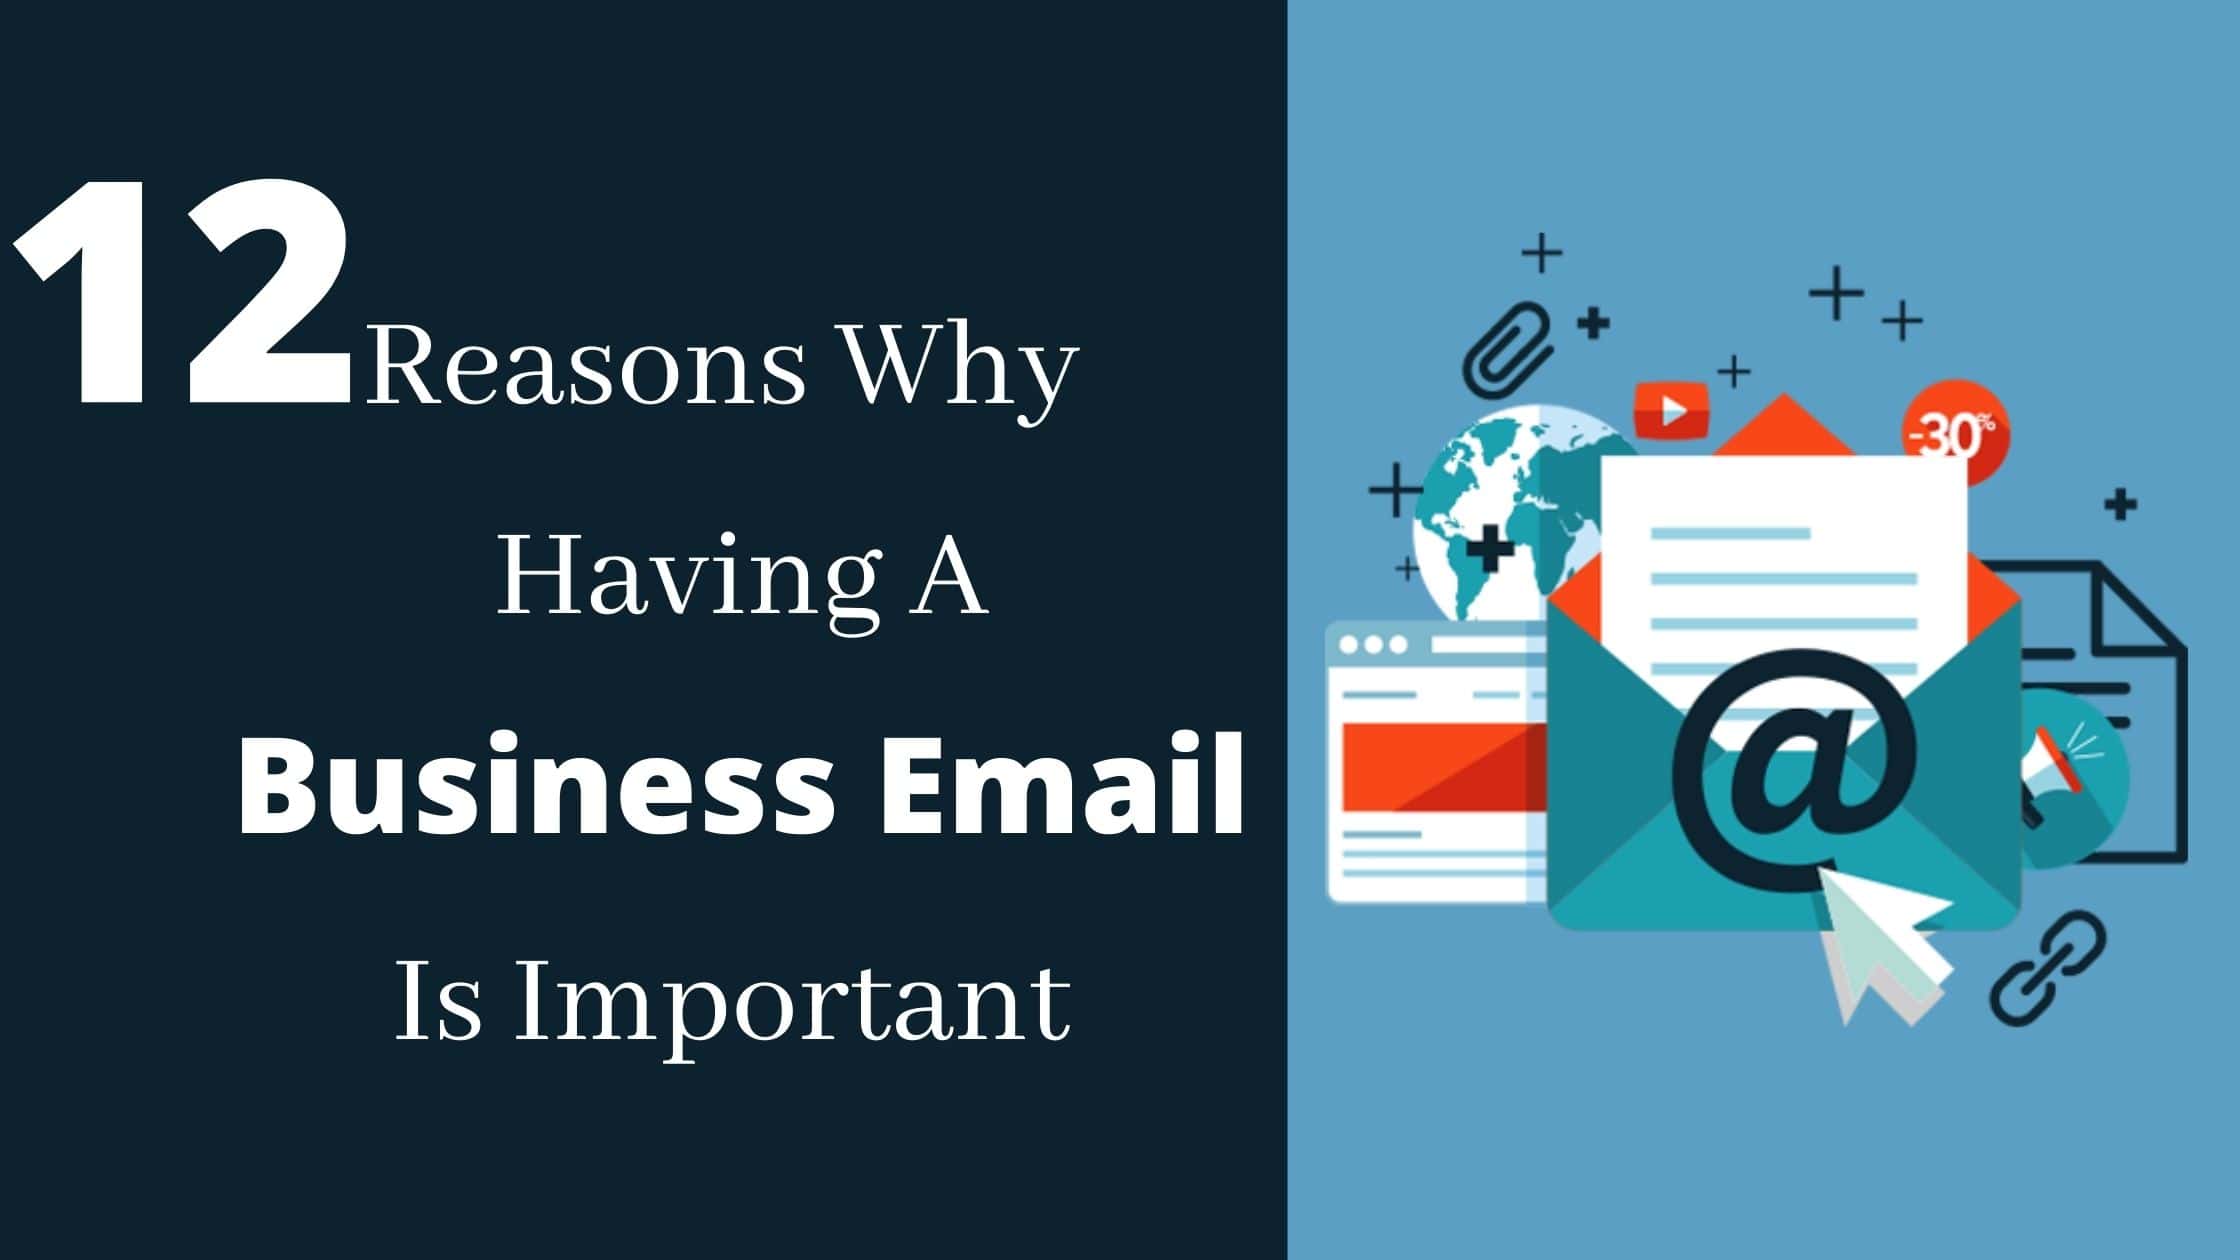 12 Reasons Why Having A Business Email Is Important?